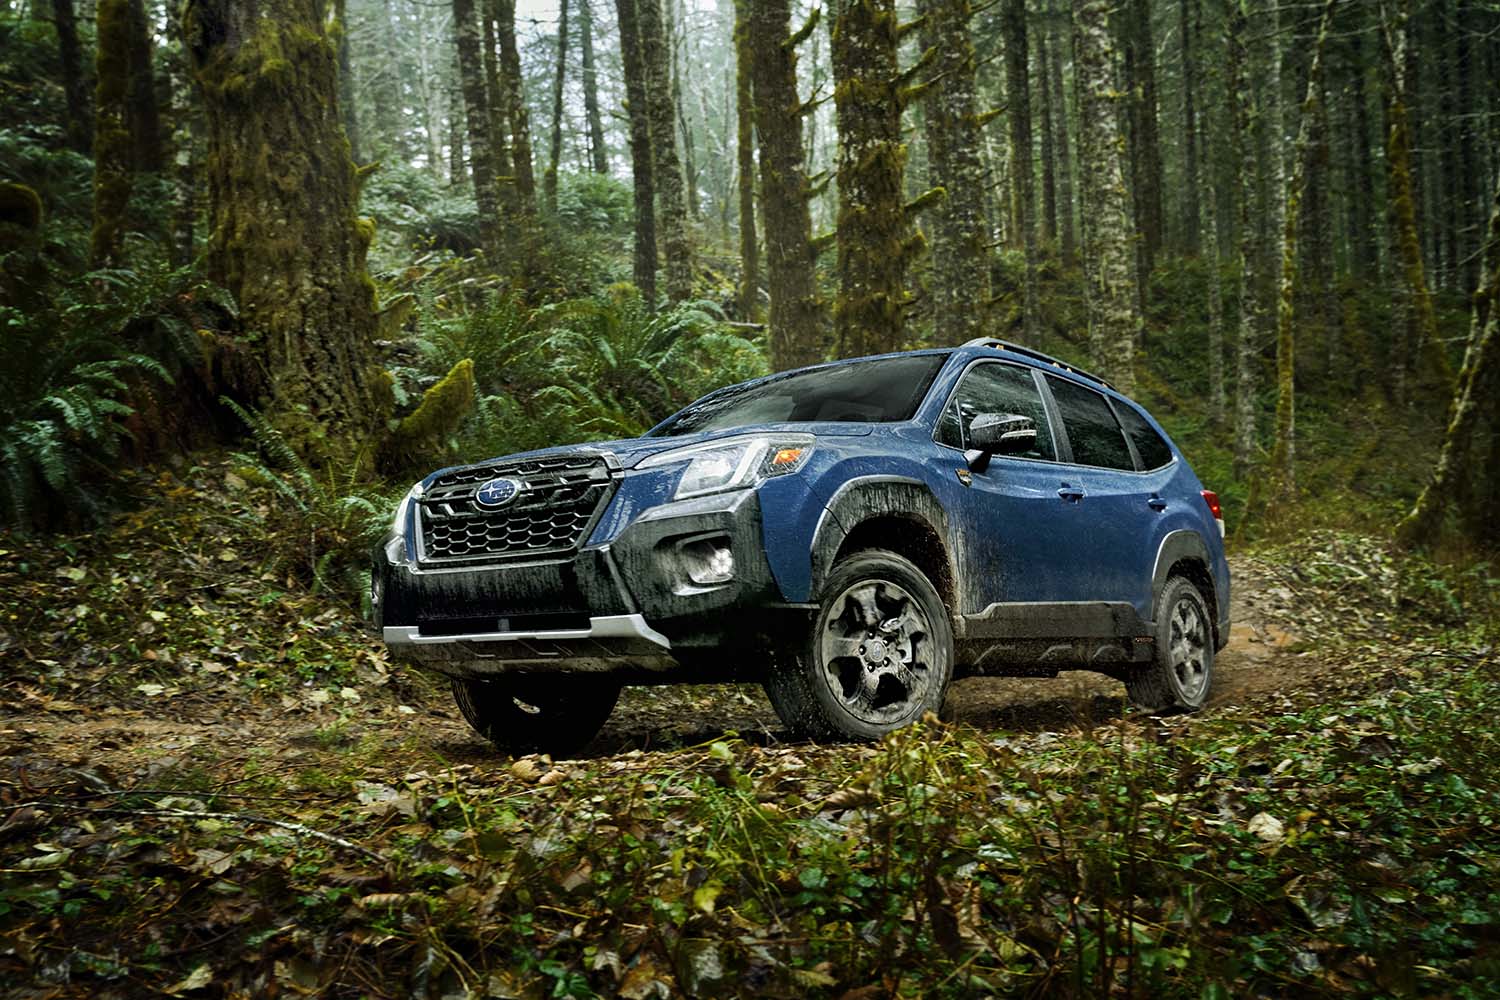 Subaru Forester Wilderness trim in bright blue in a heavily wooded area on a dirt road